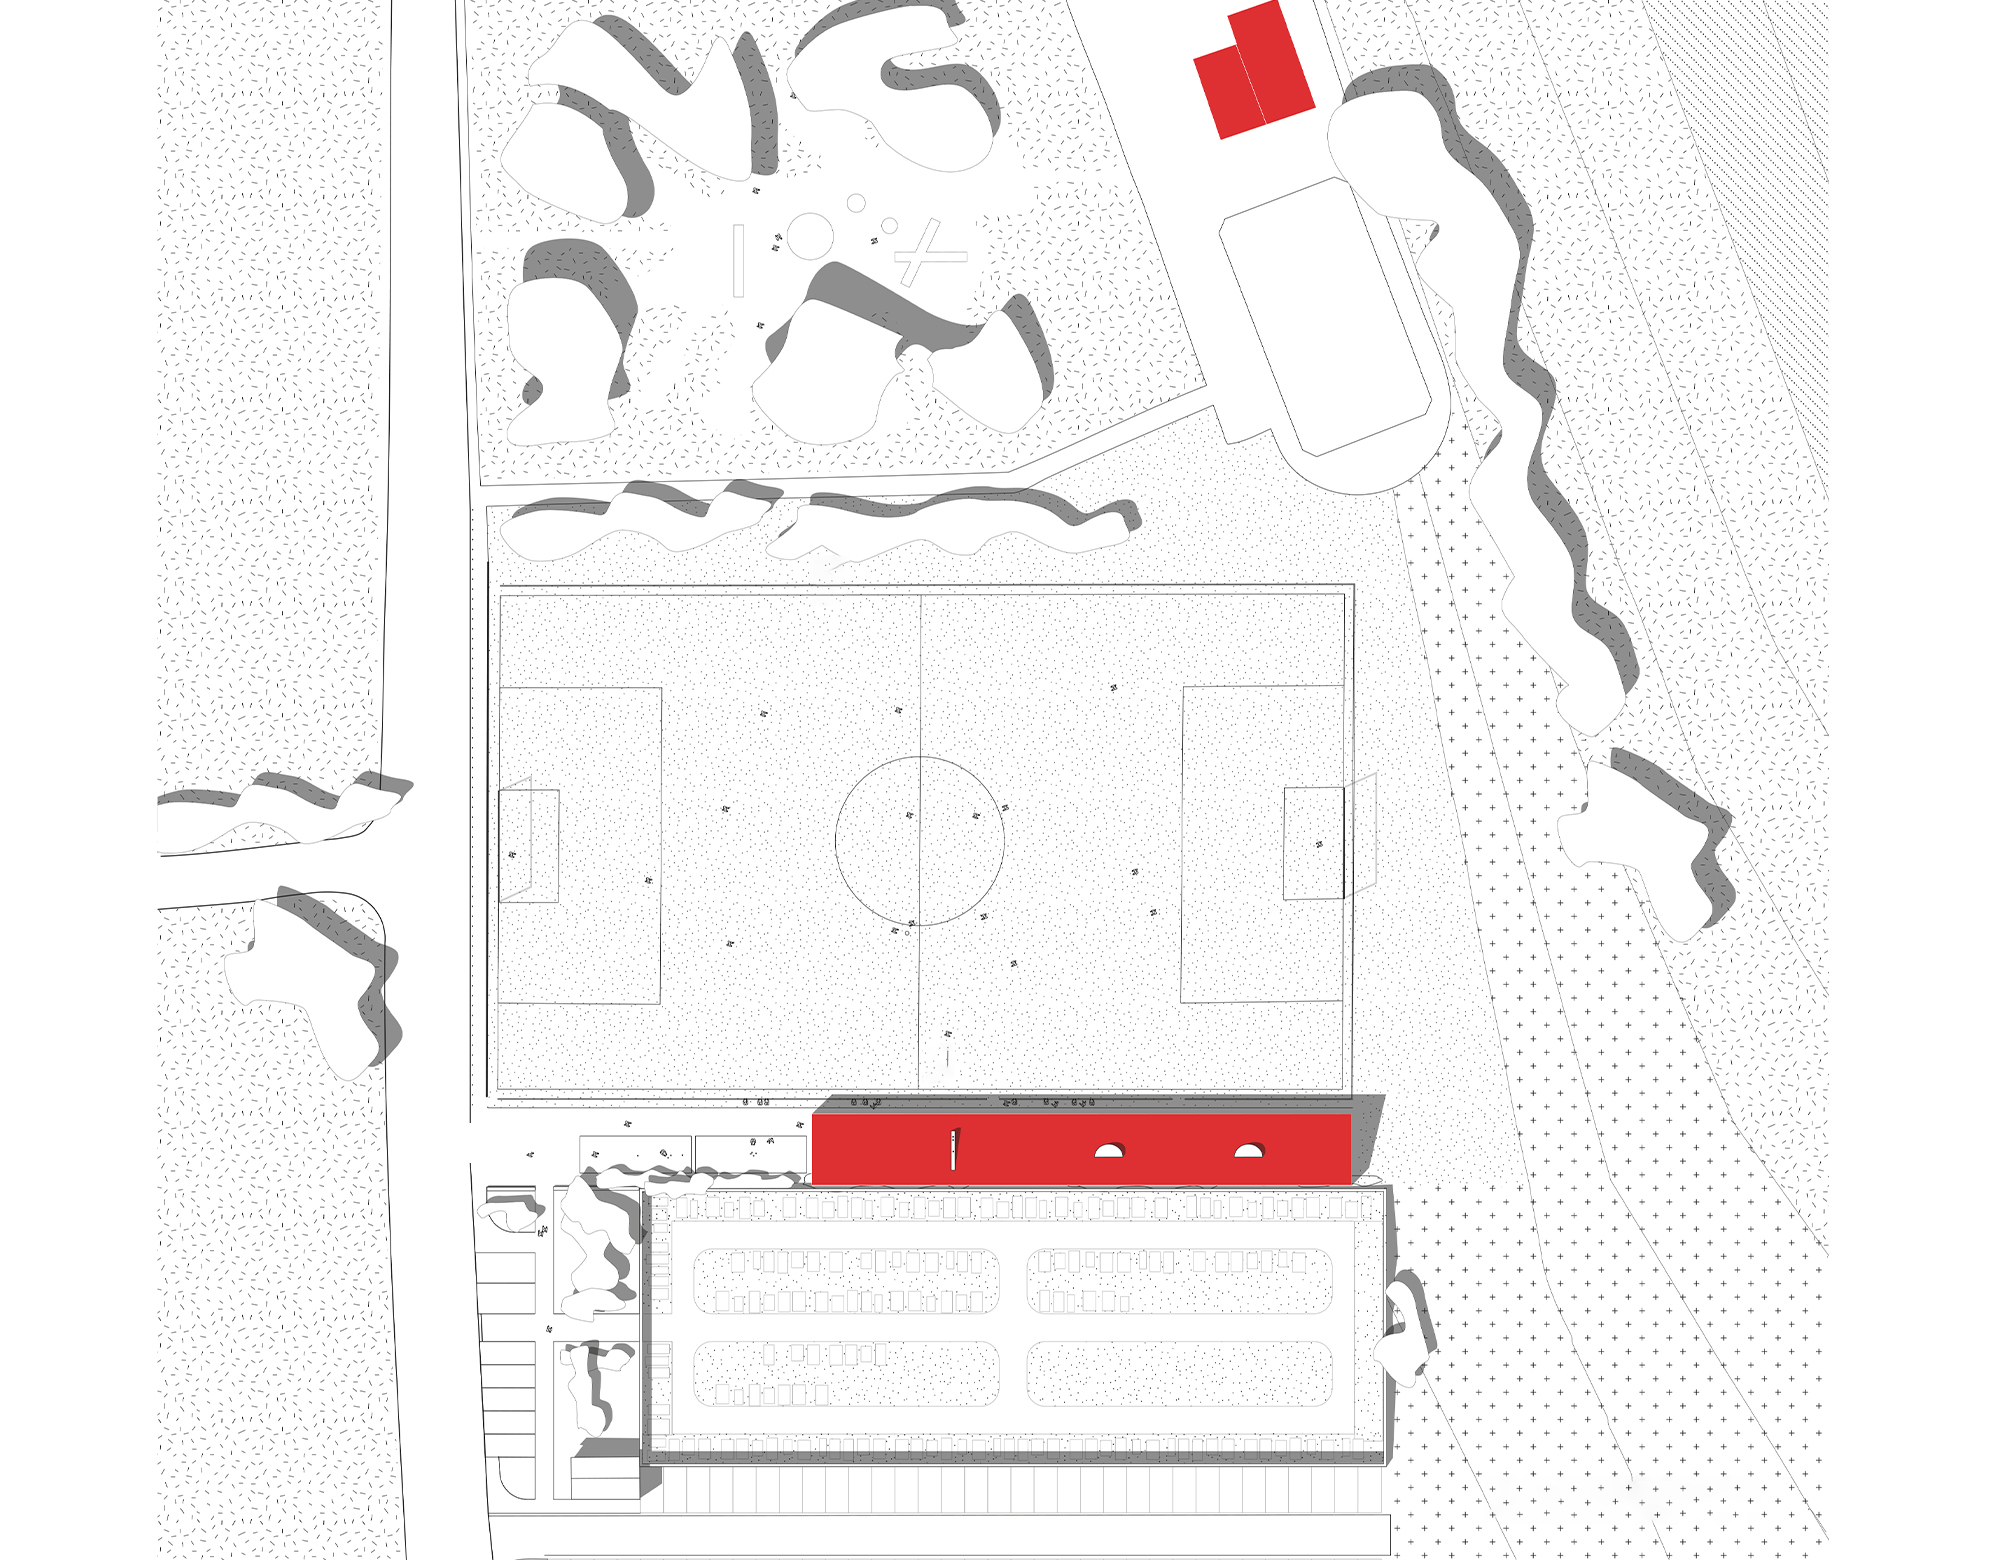 02-plan-clubhouse-football-nu-architecture-ingenierie